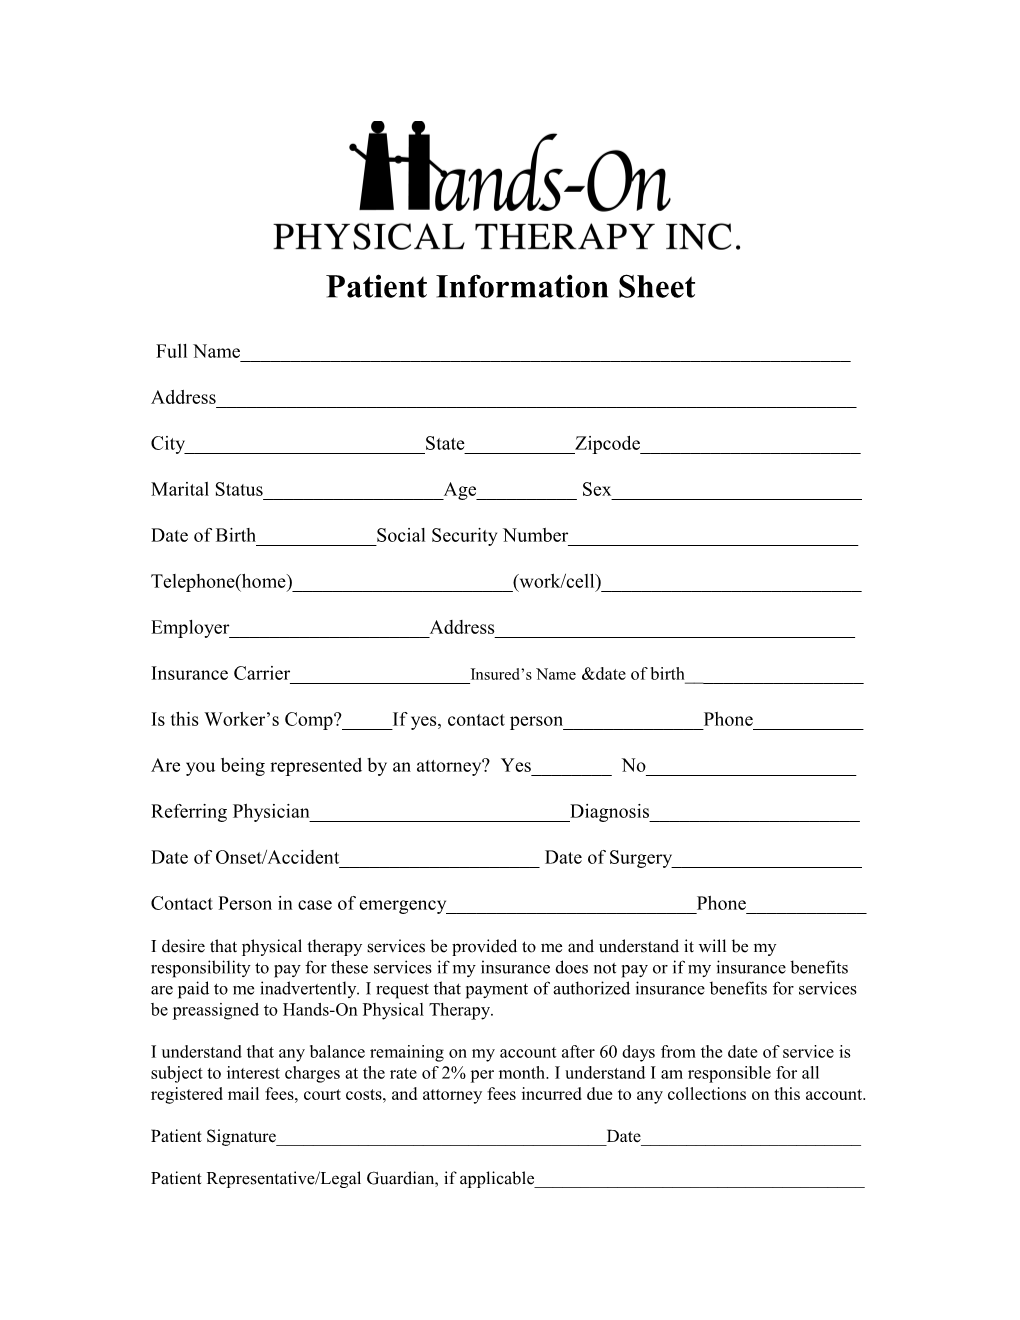 Hands-On Physical Therapy, LLC